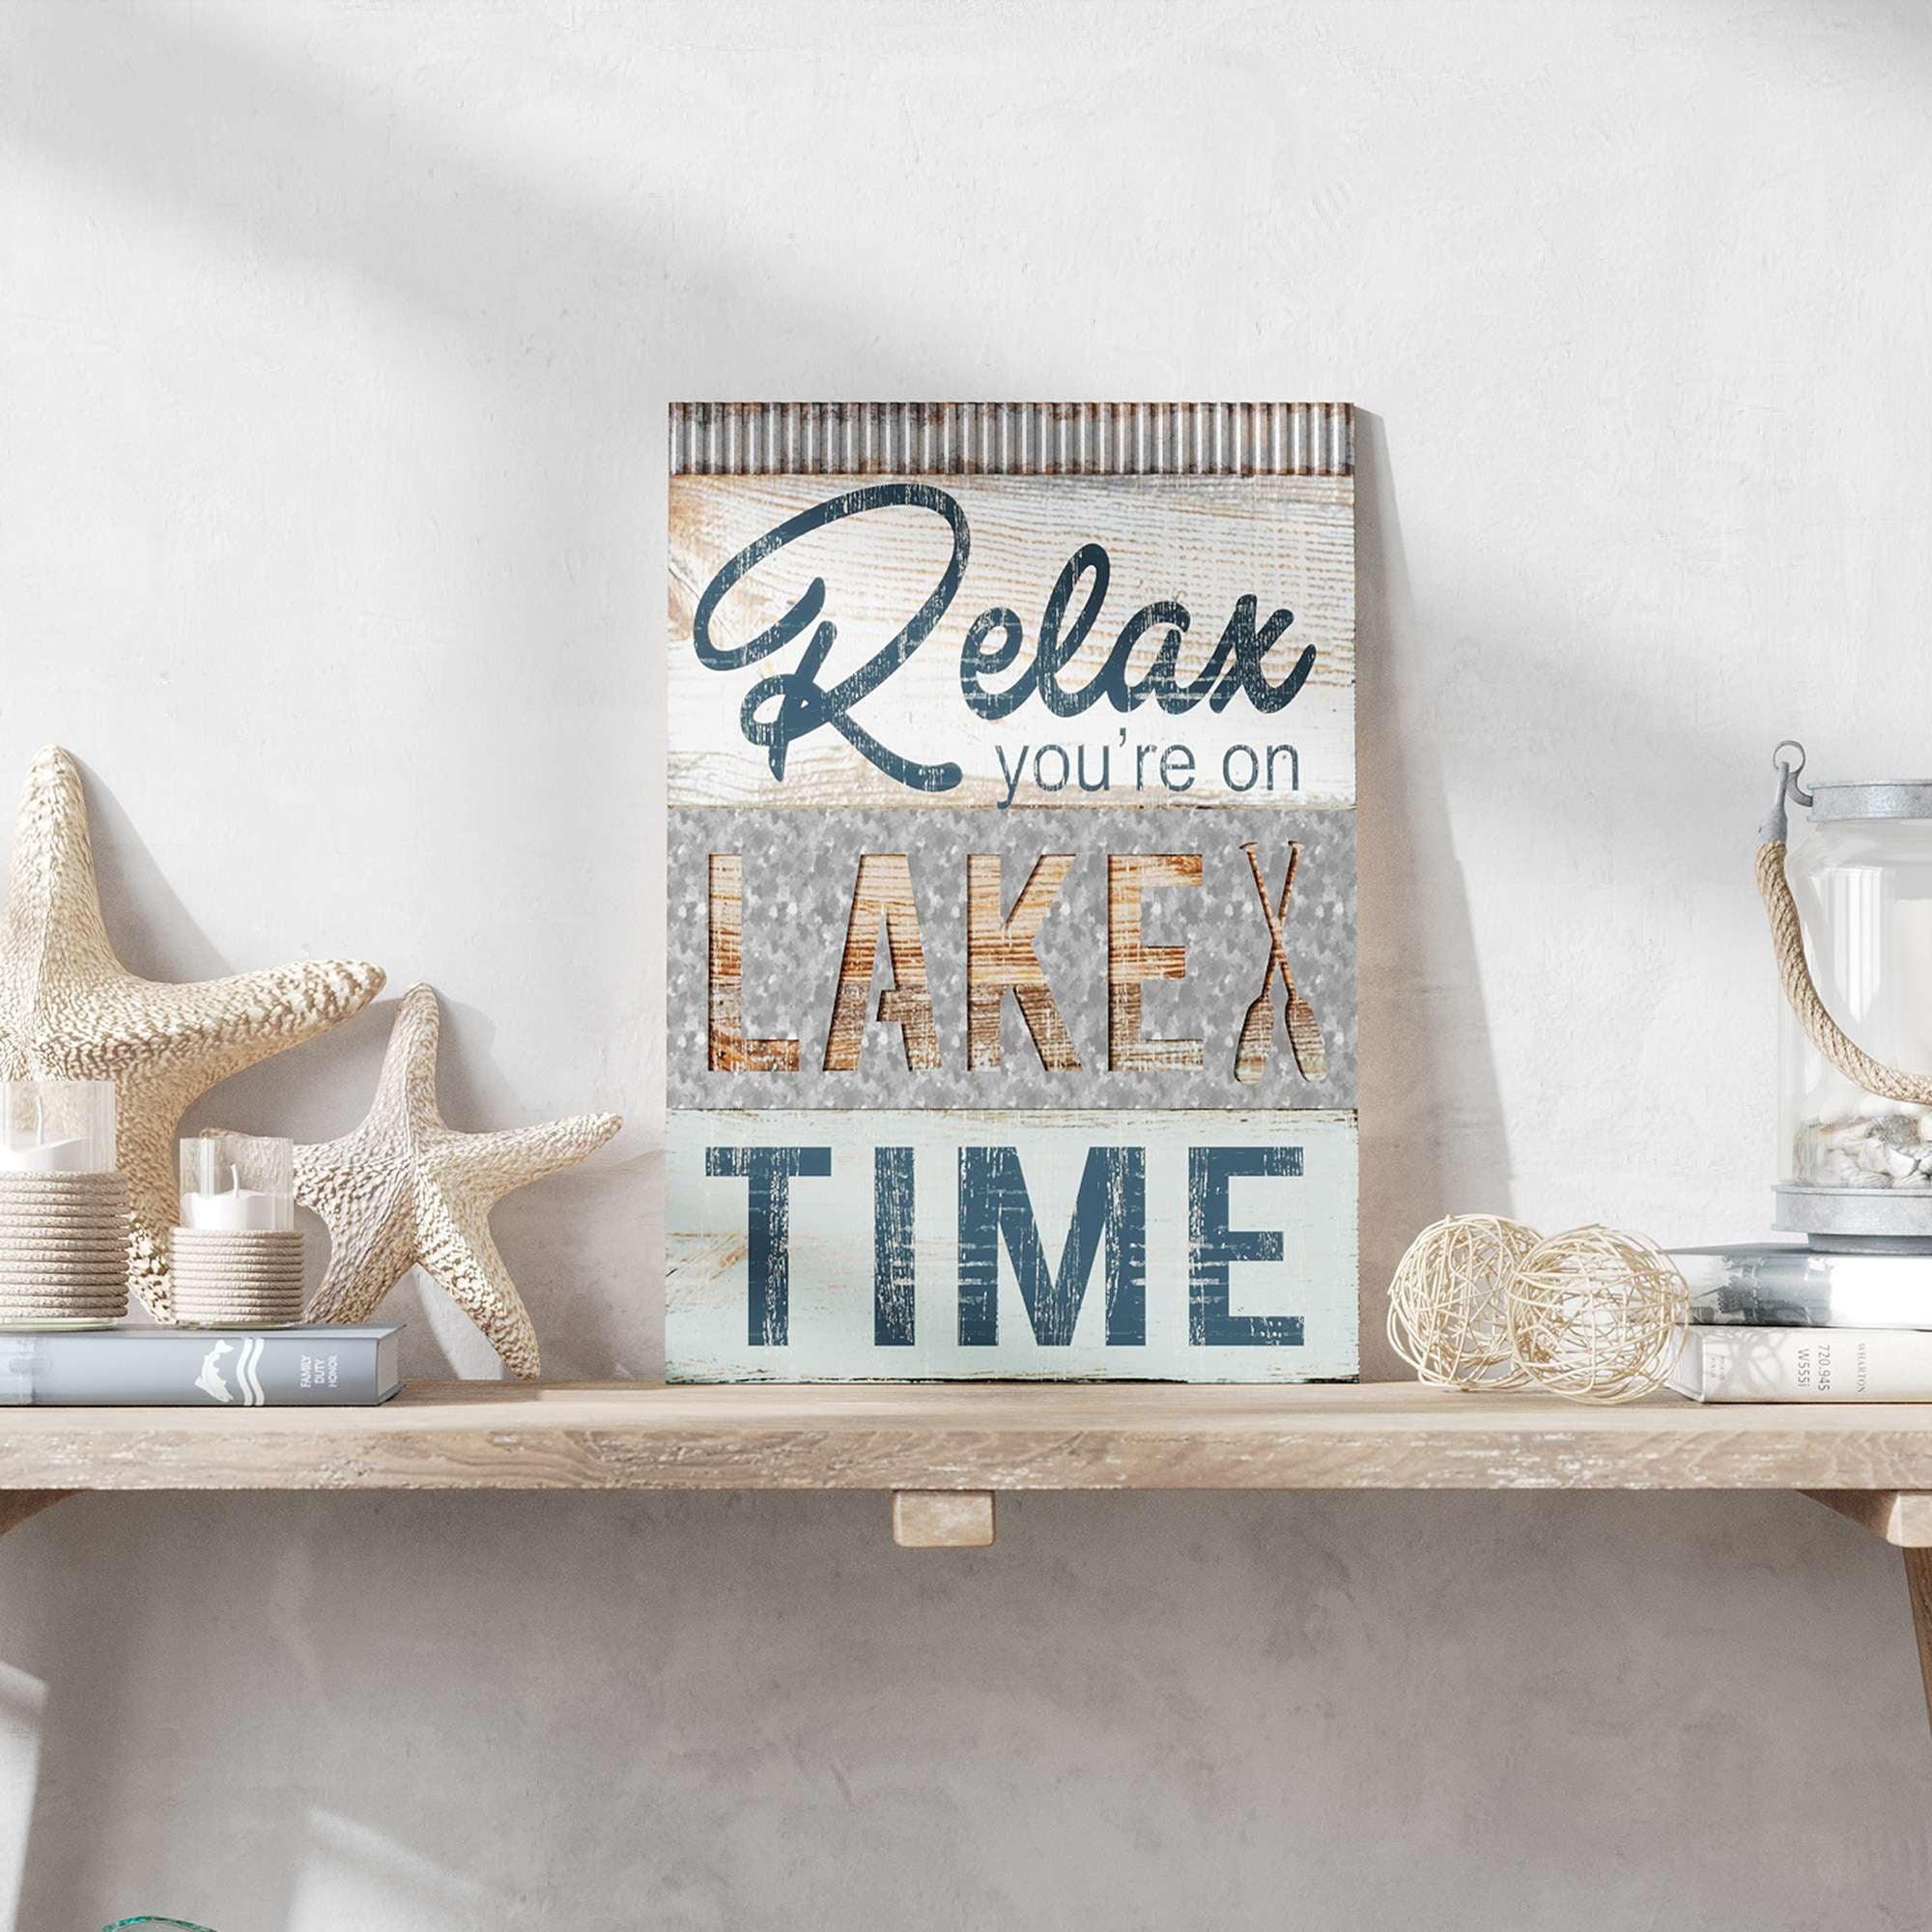 Relax, you're on Lake Time - Retro Large Metal Thermometer